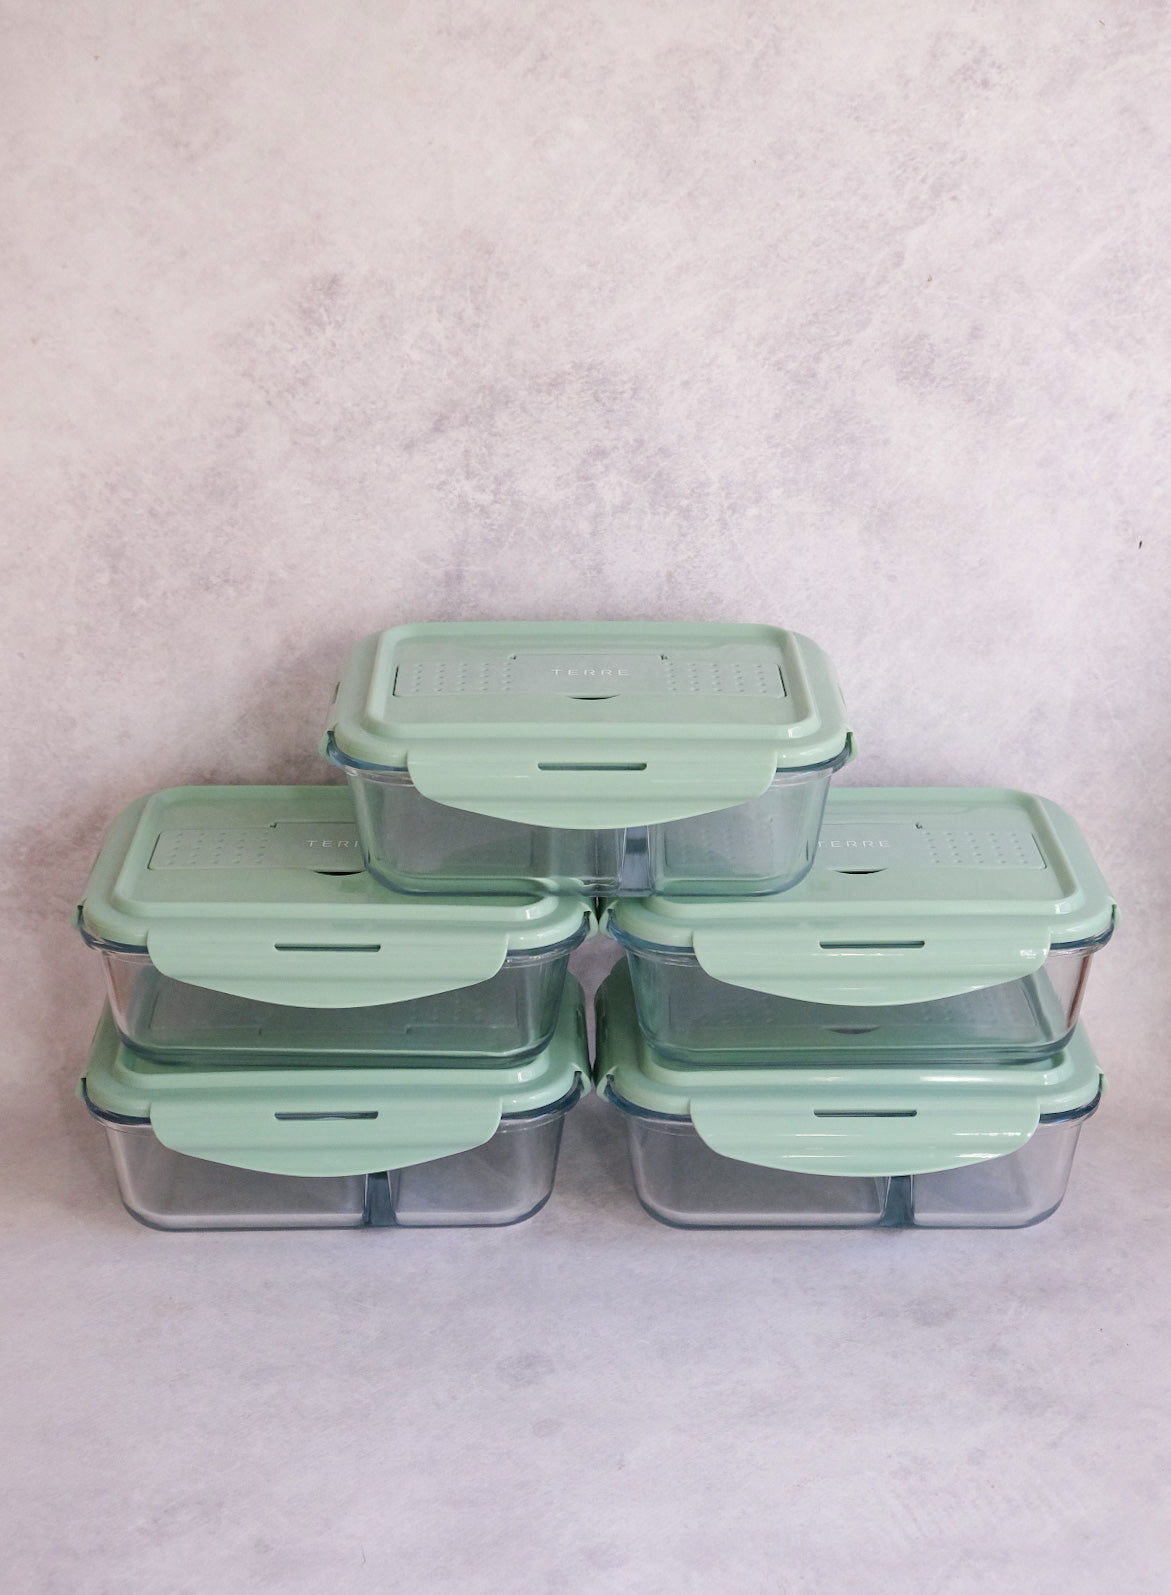 Tupperware Eco Lunch It Divided Container Set of 5 NEW